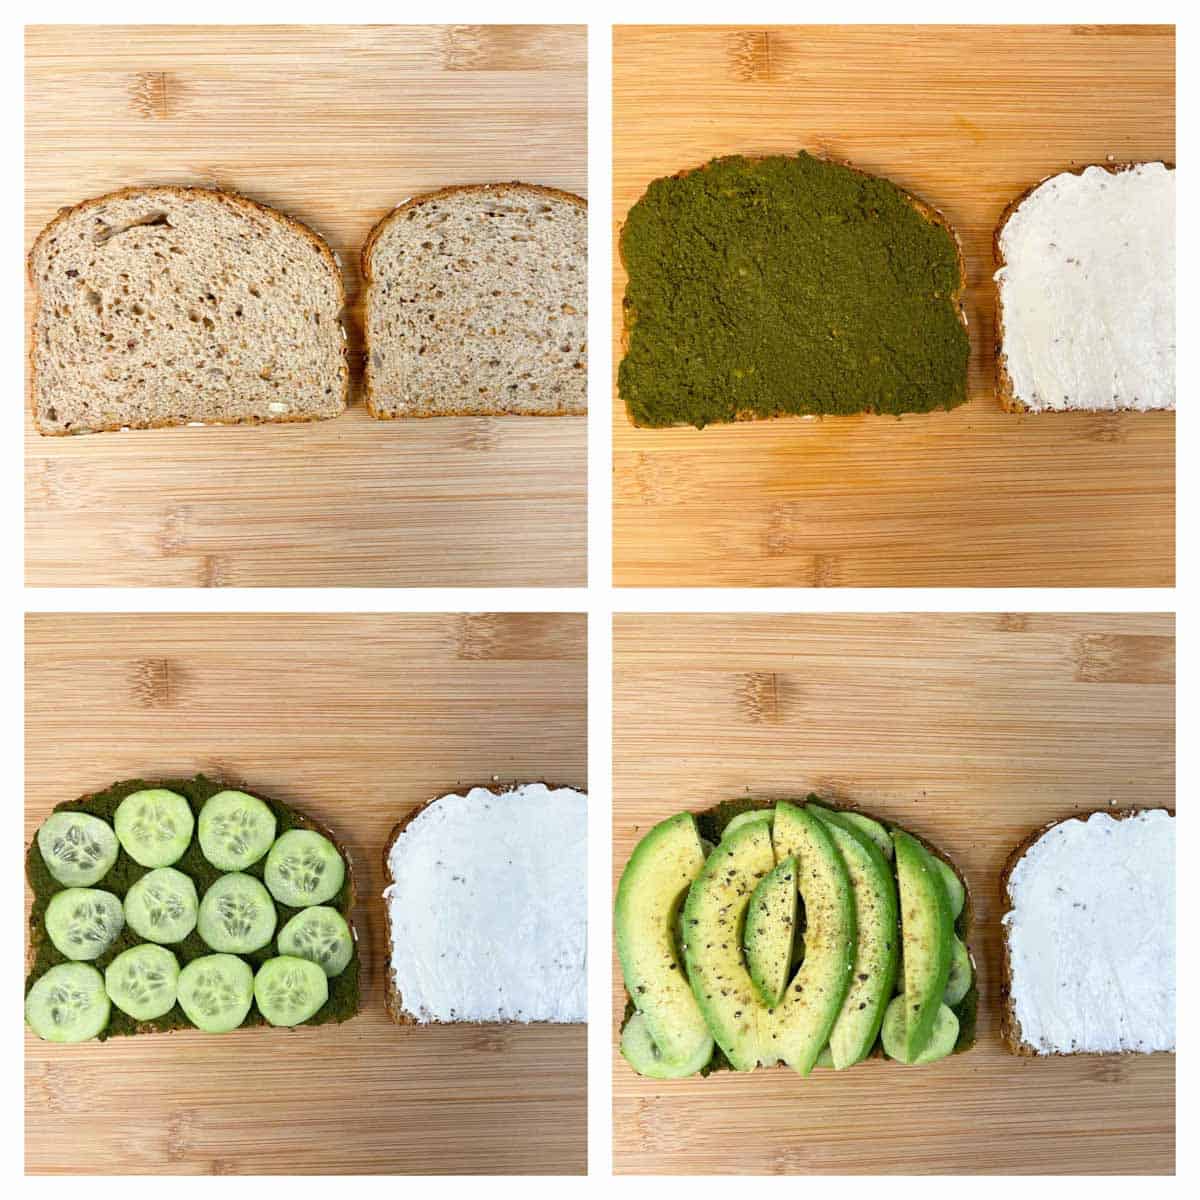 step to spread chutney and cream cheese along with cucumber and avocado slices collage